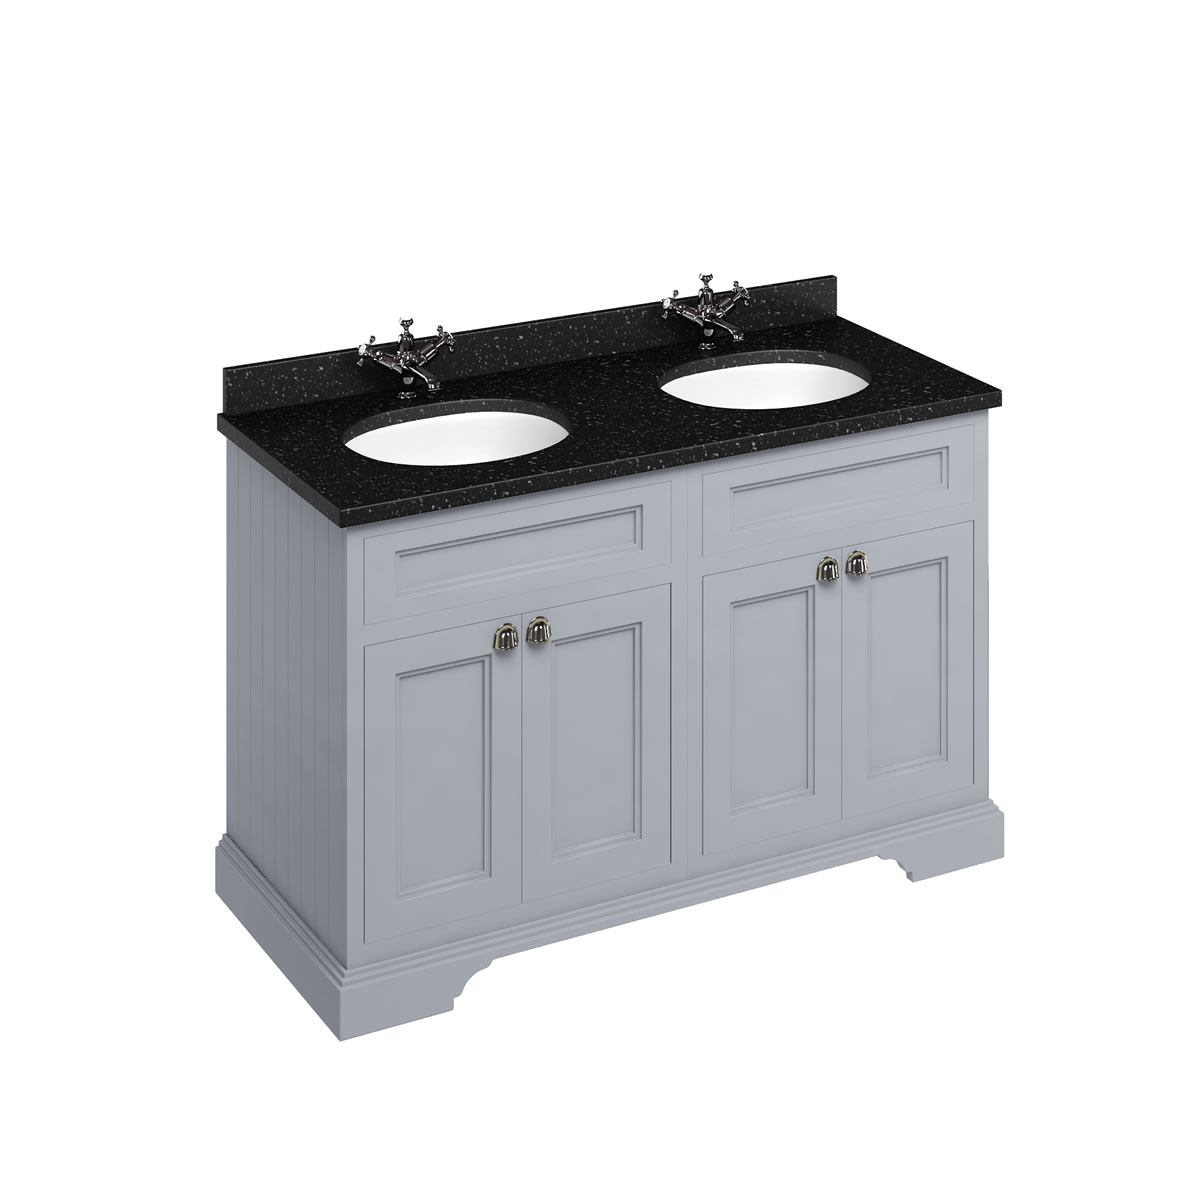 Freestanding 130 Vanity Unit with doors - Classic Grey and Minerva black granite worktop with two integrated white basins 